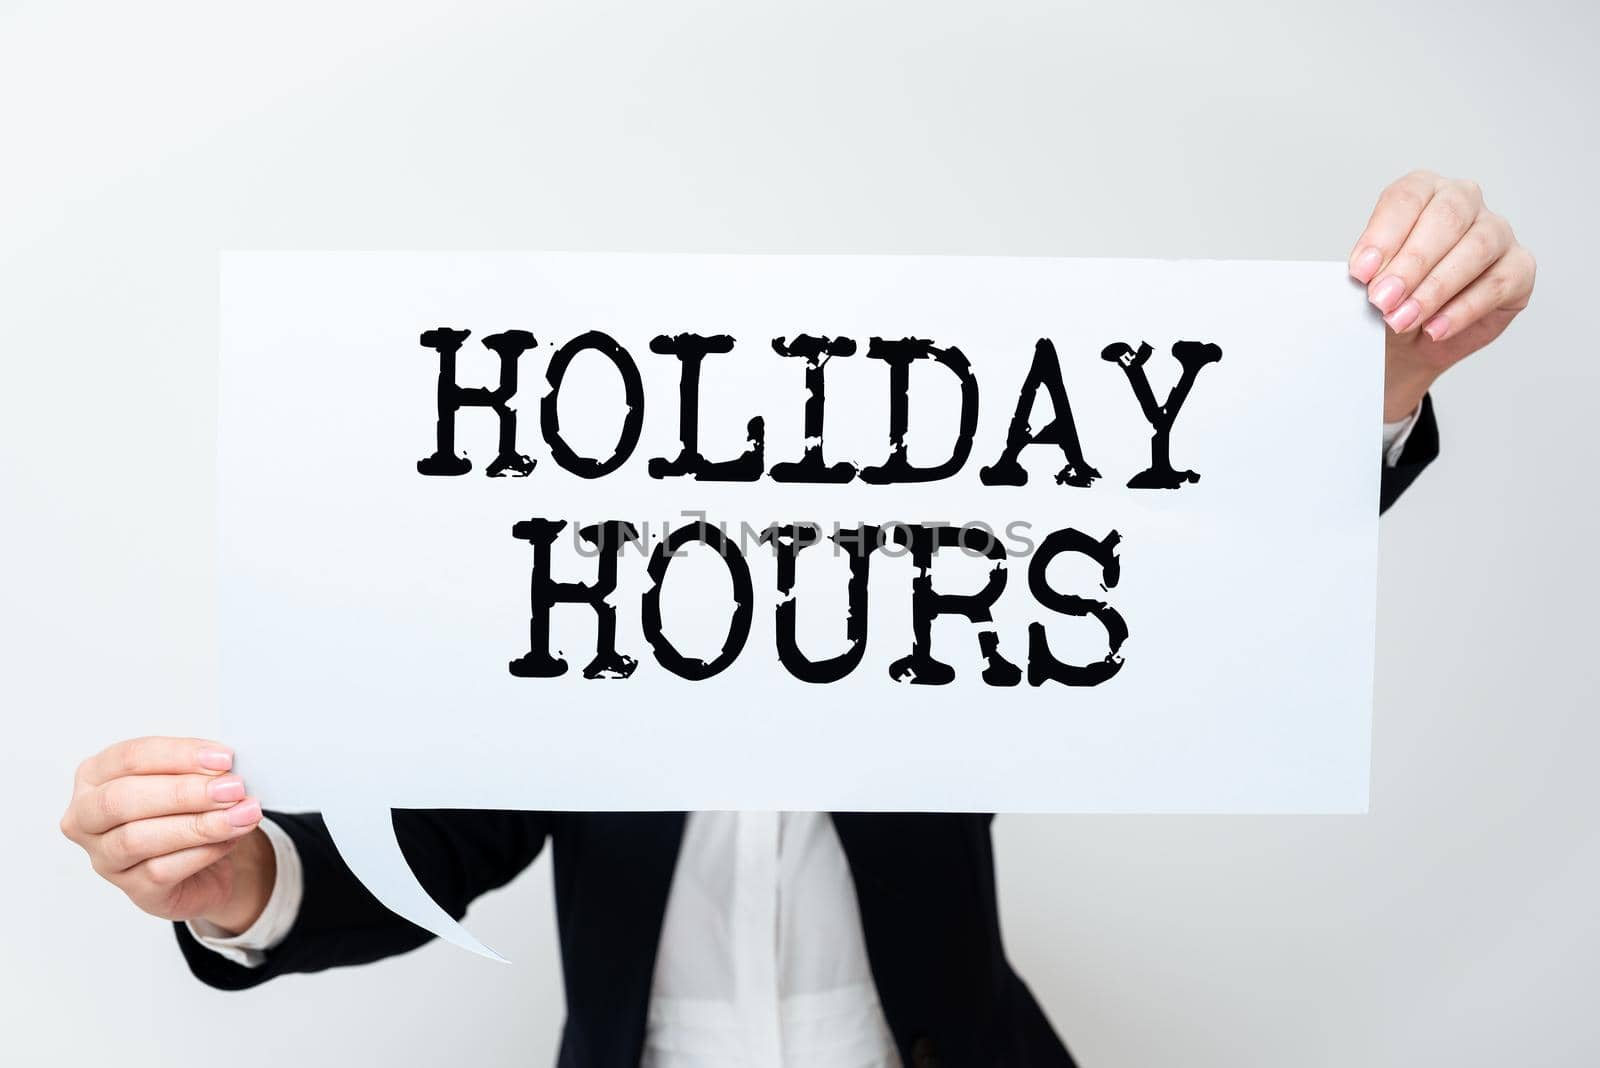 Writing displaying text Holiday Hours, Concept meaning Celebration Time Seasonal Midnight Sales ExtraTime Opening Businesswoman Holding Speech Bubble With Important Messages.